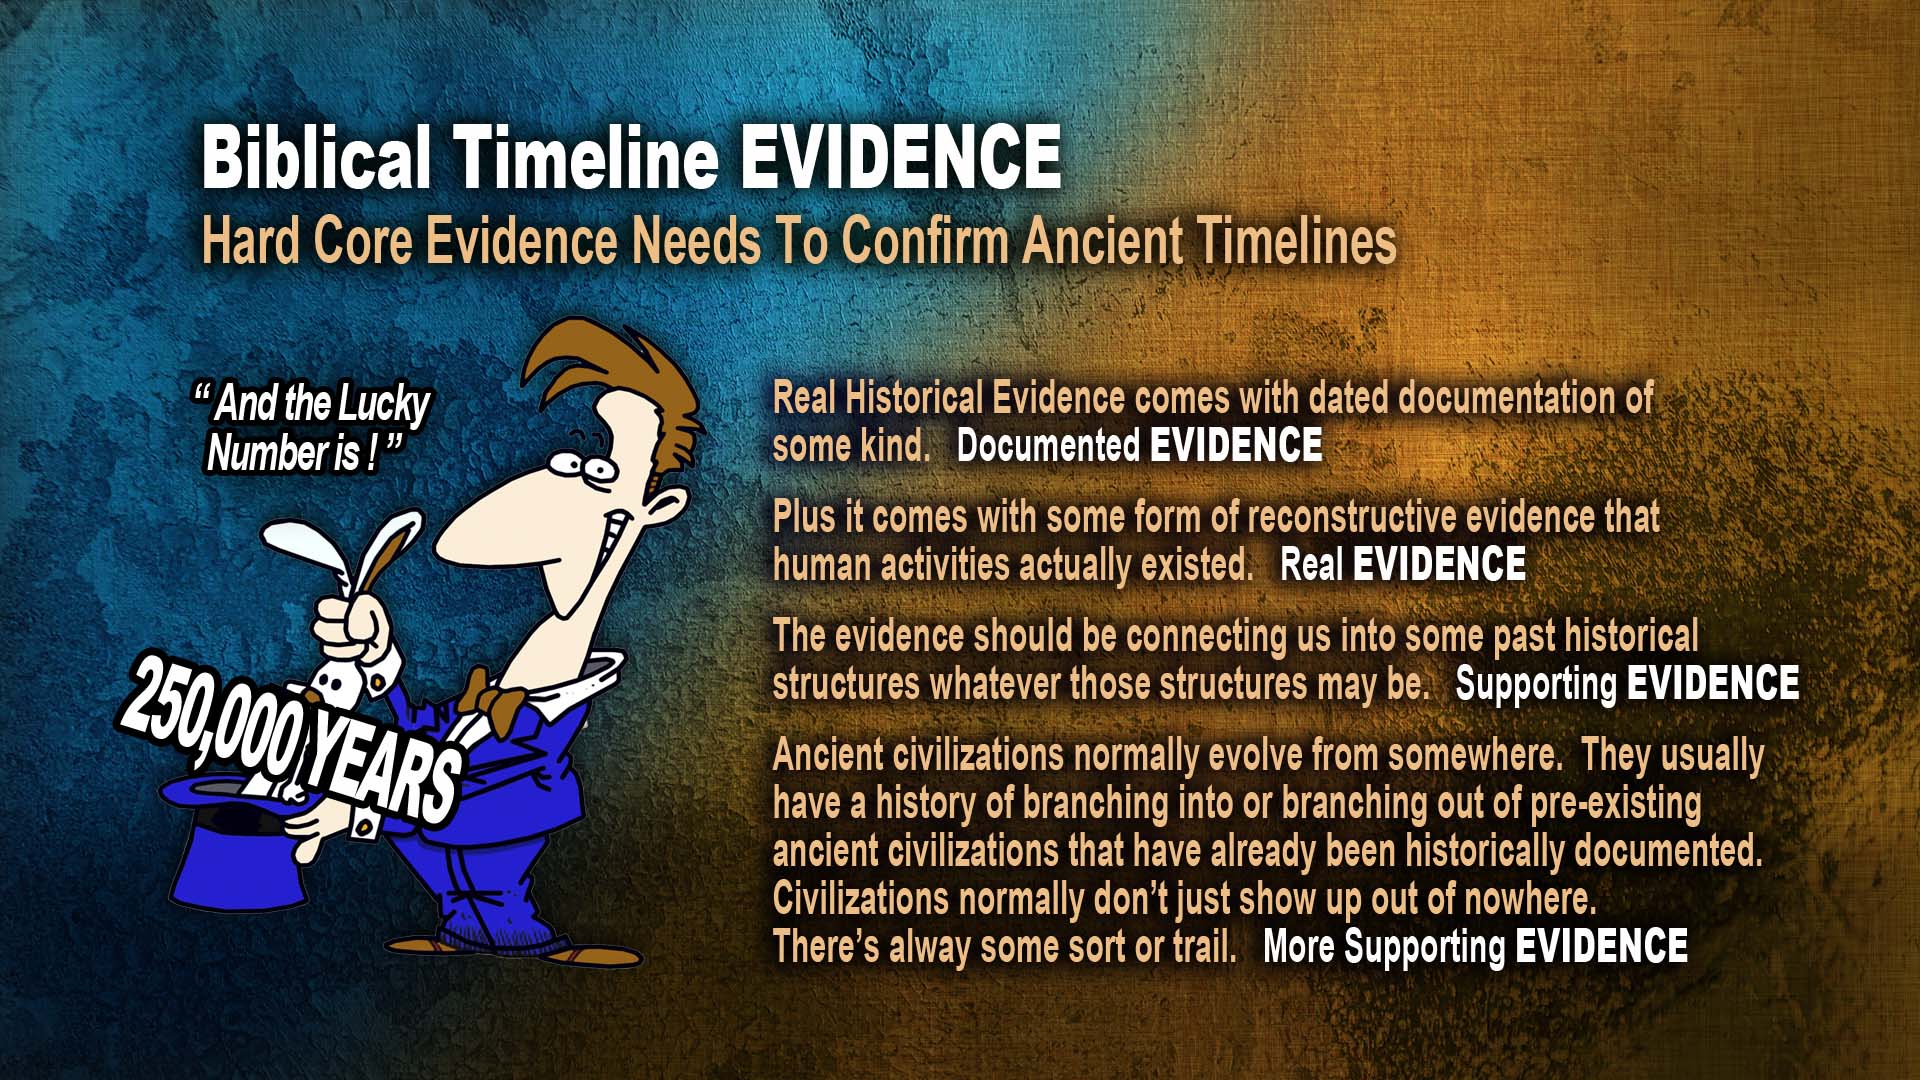 Evidence RabbitHat